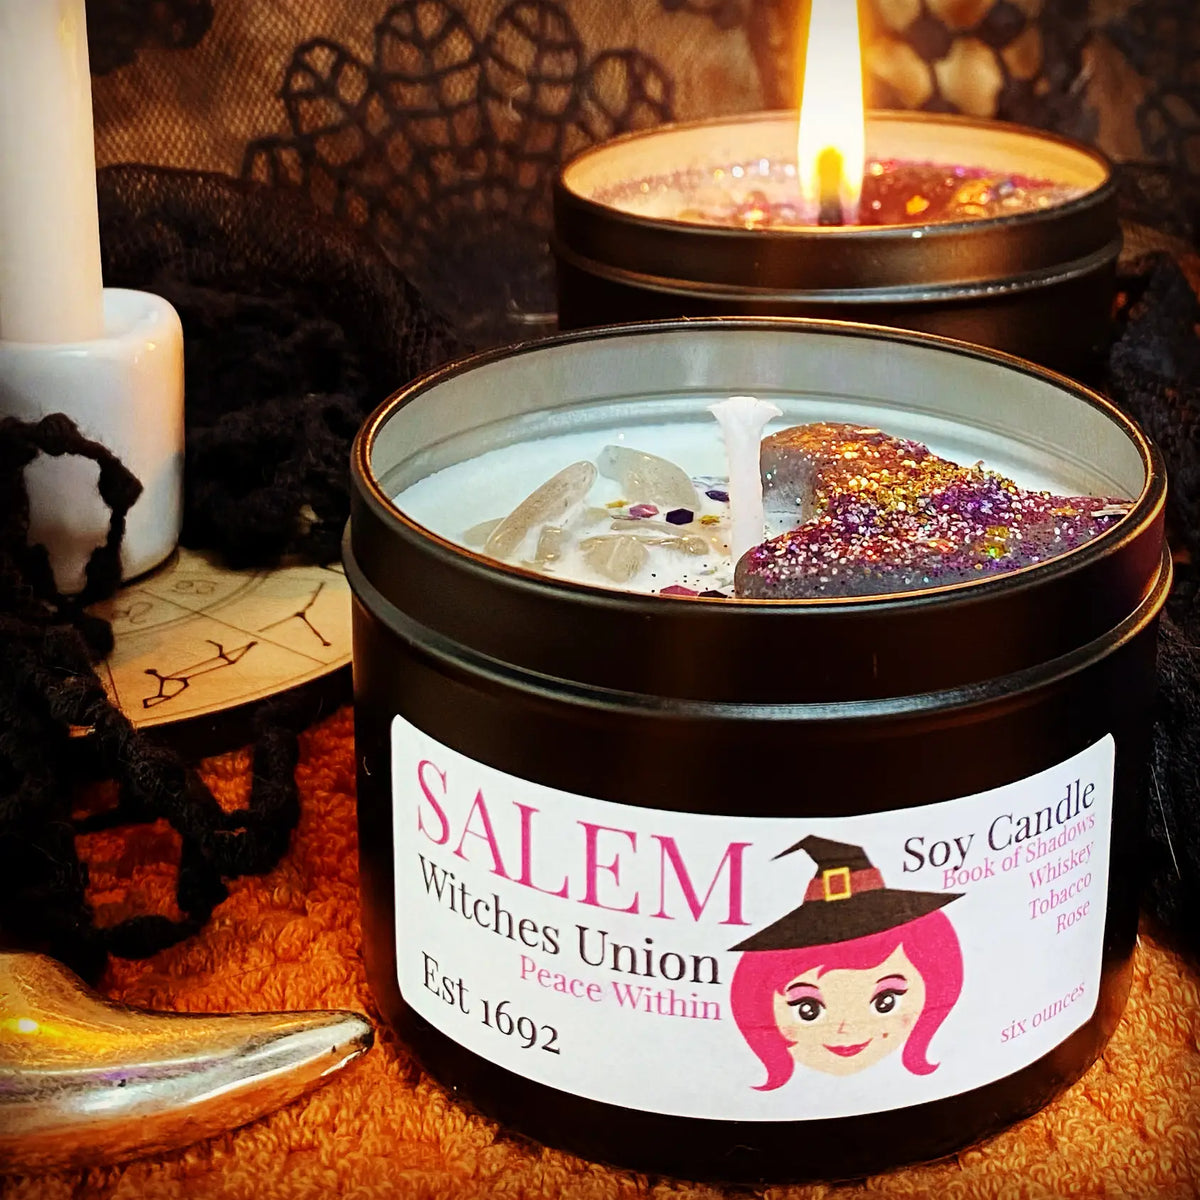 Salem Witches Union Soy Candle